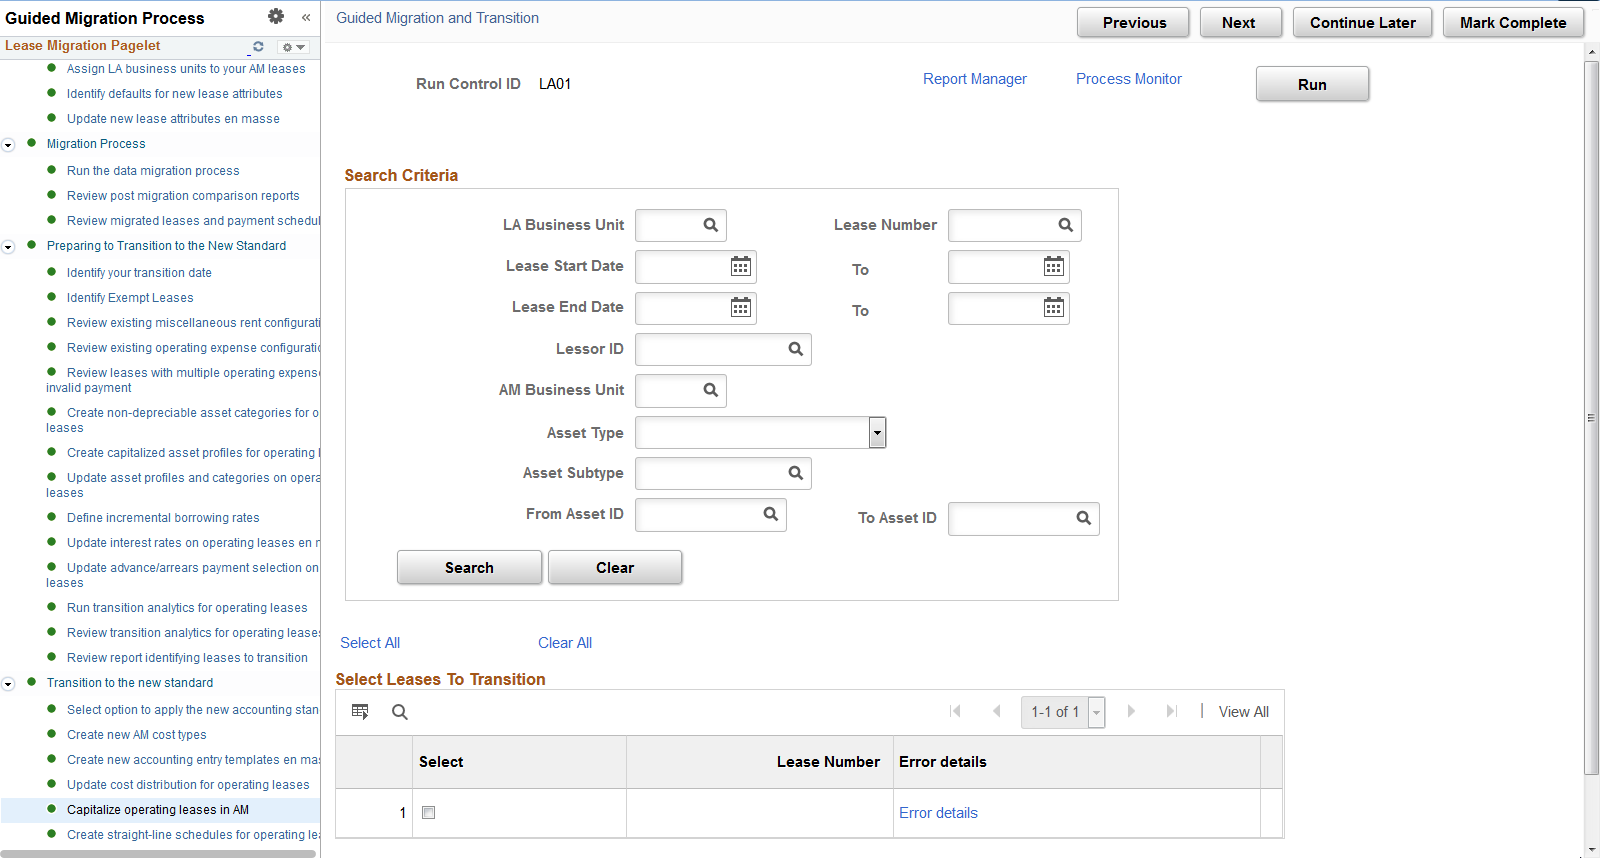 Capitalize Operating Leases in AM page